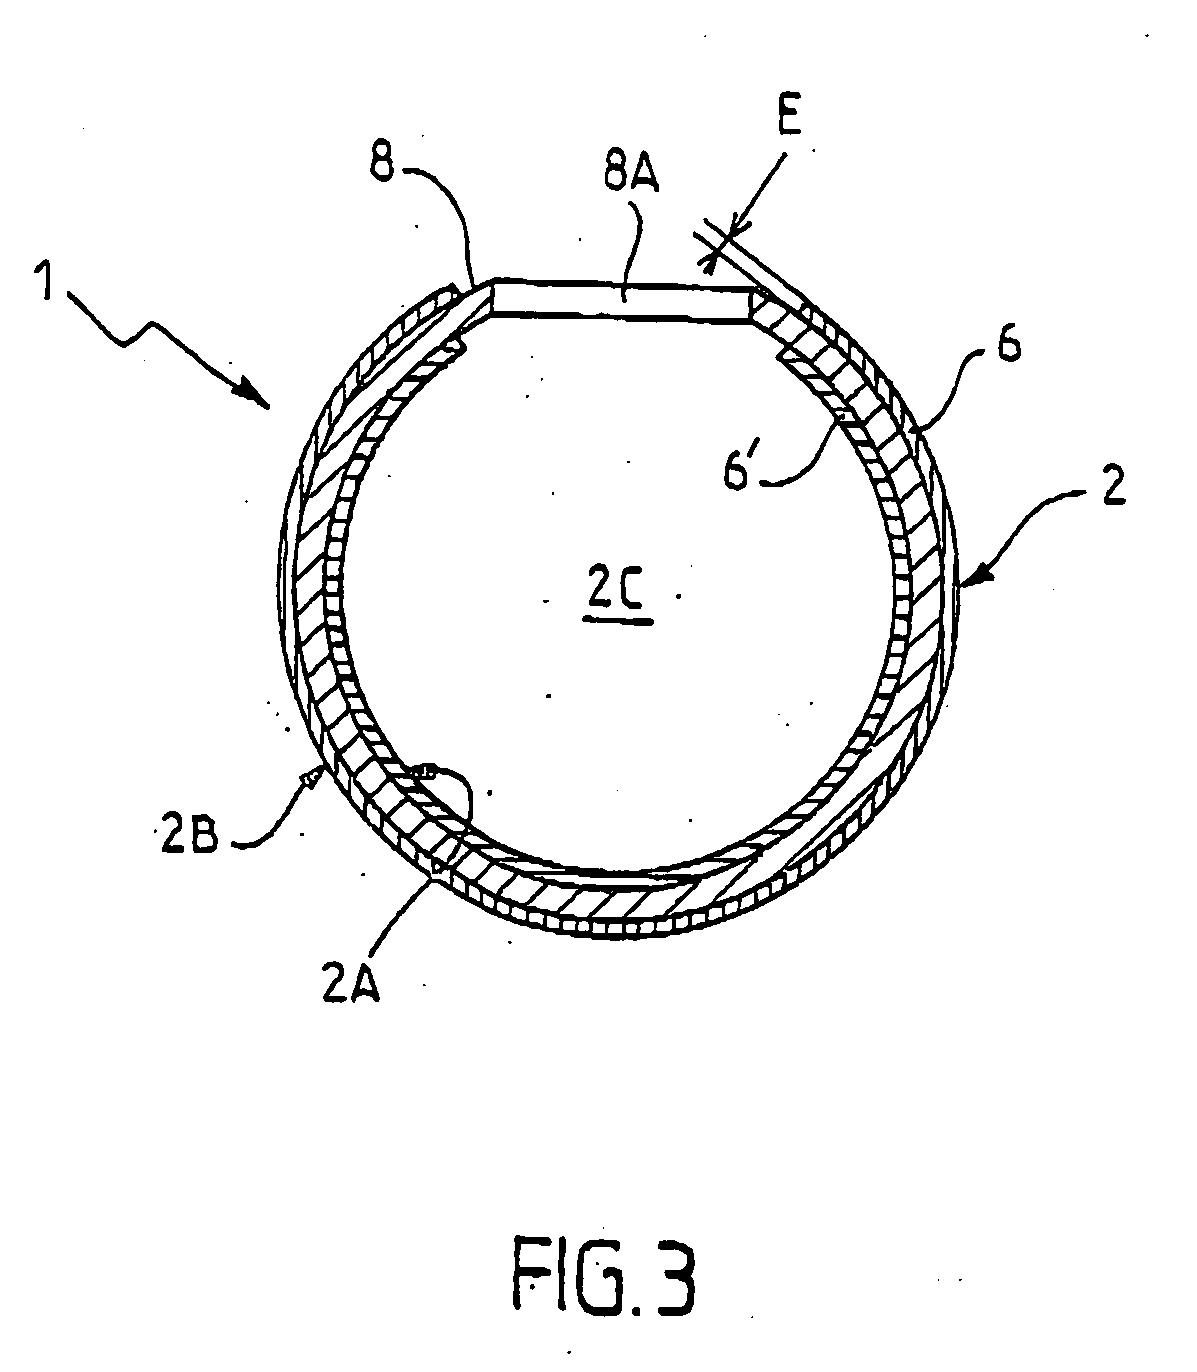 Intra-gastric balloon coated in parylene, a method of fabricating such a balloon and of using parylene to coat an intra-gastric balloon